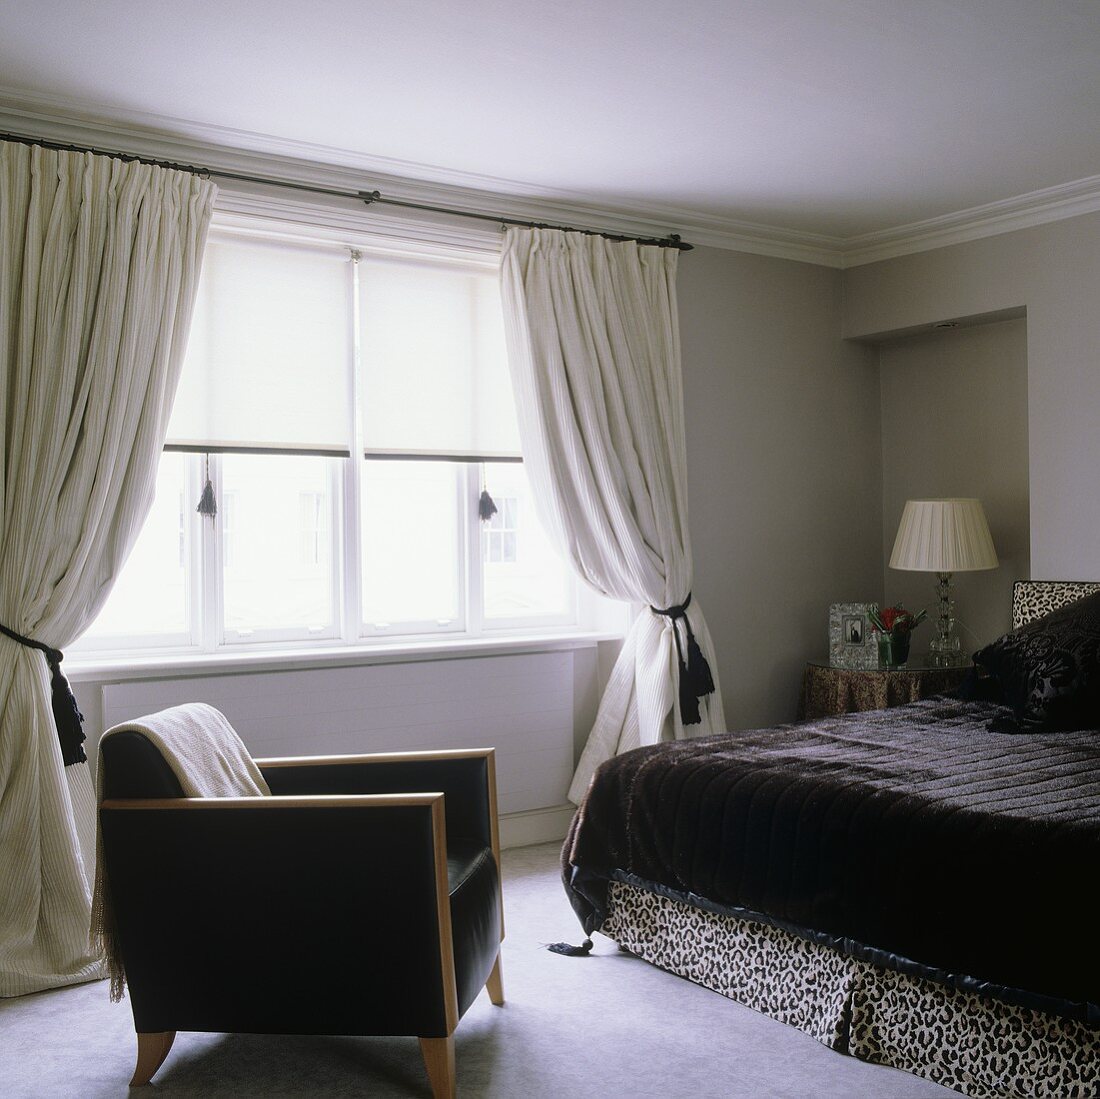 A black leather armchair and a double bed with a black fur cover in front of a window with gathered curtains